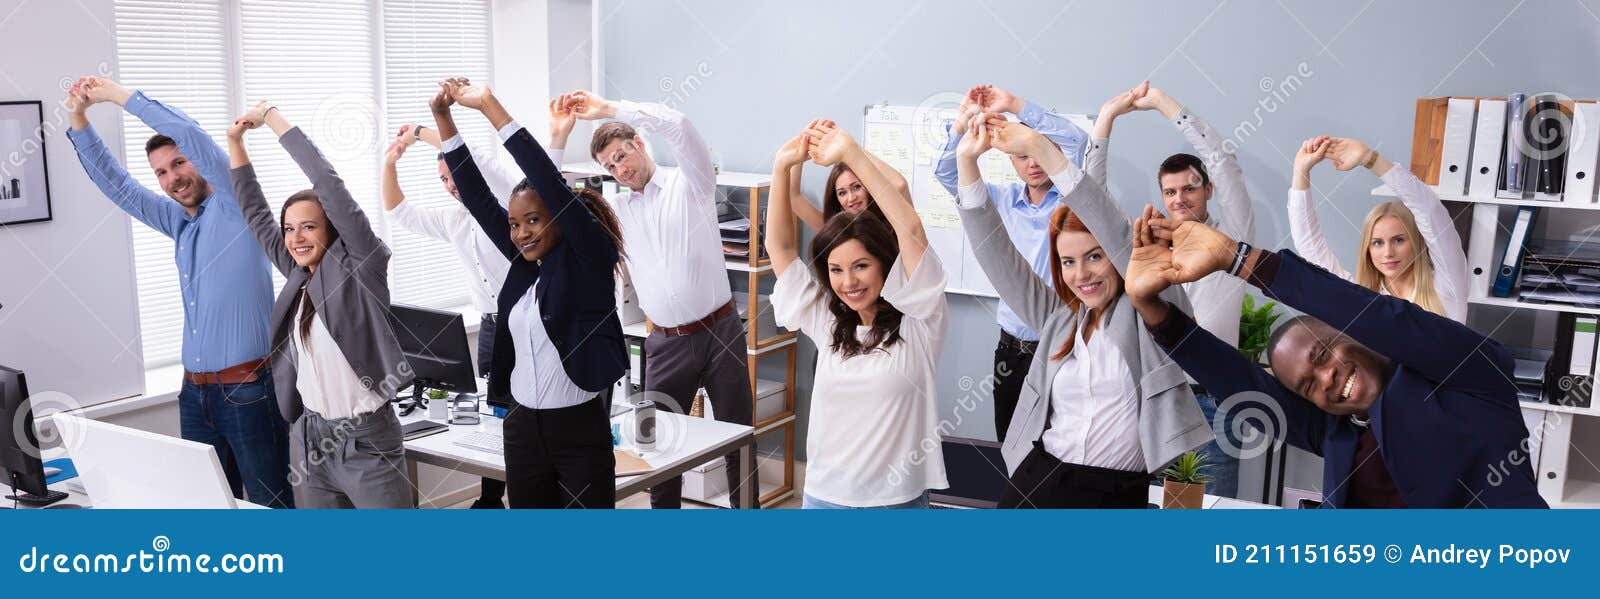 young office workers doing stretching exercise at workplace